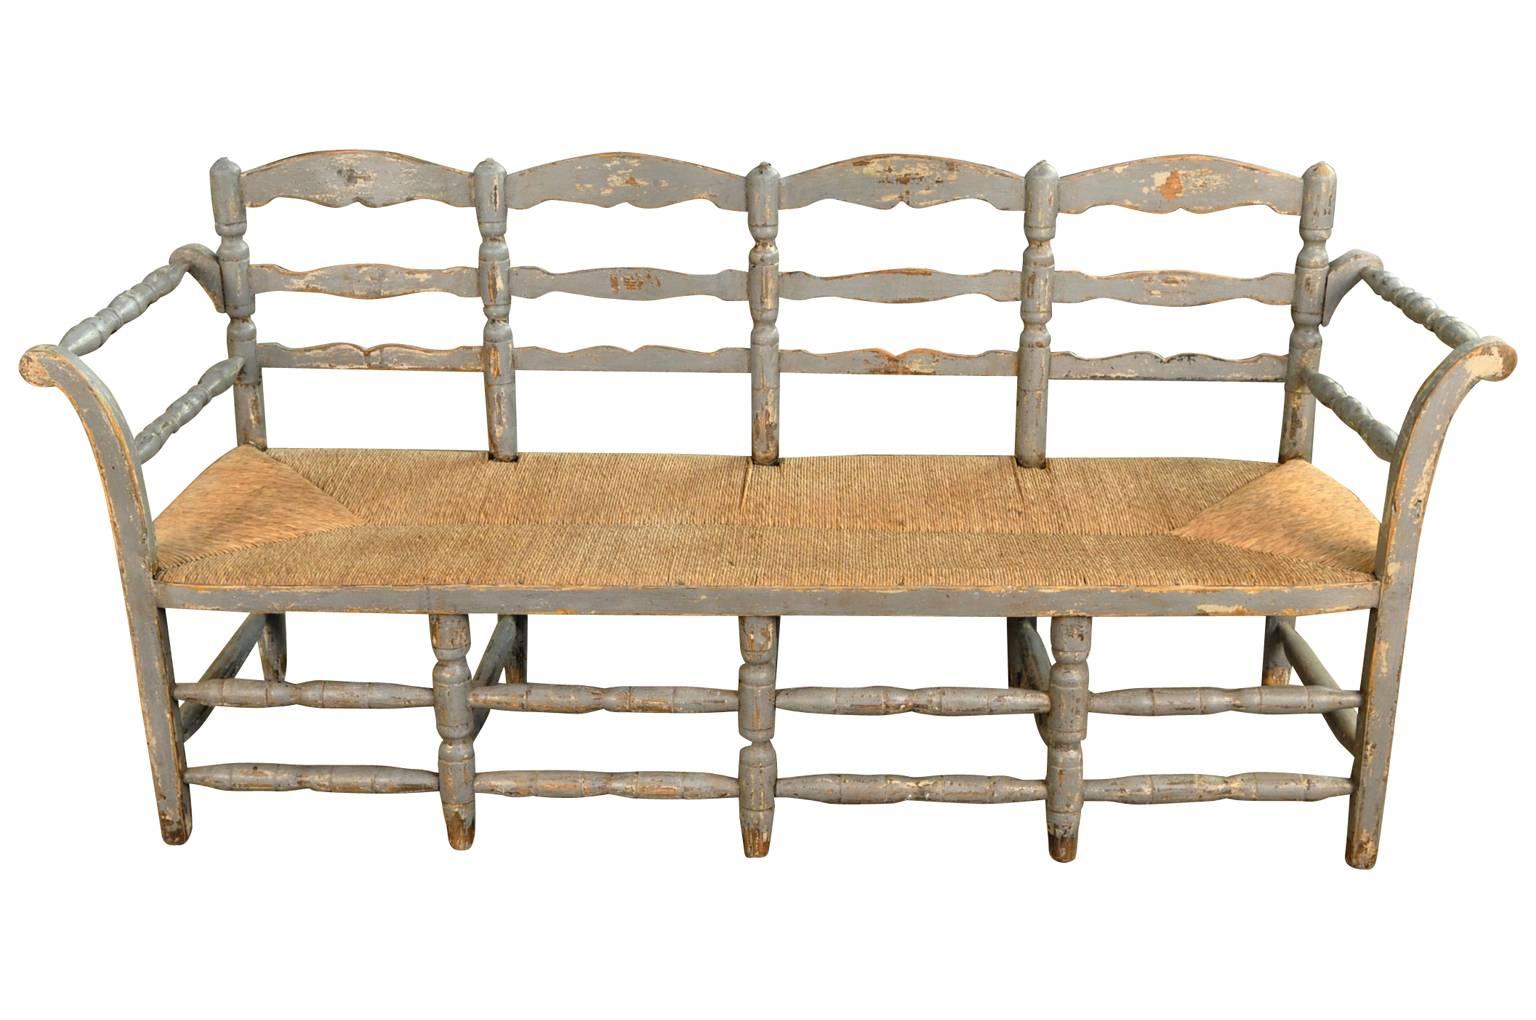 A very charming mid-19th century painted wood bench from Portugal. Wonderful patina and finish with a handsome rush seat.